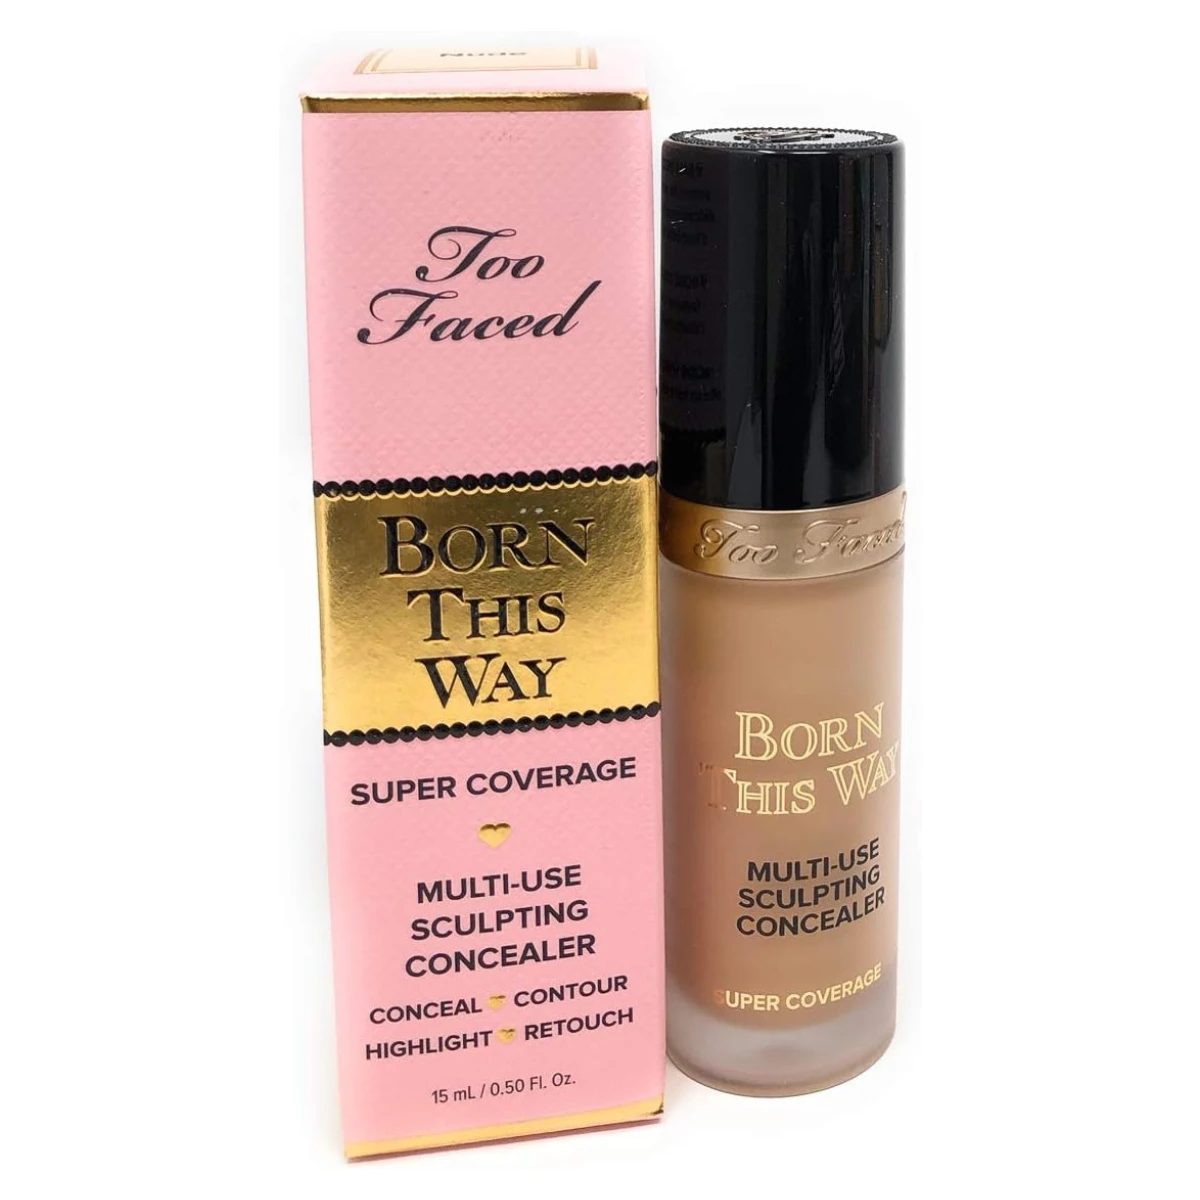 Too Faced Born This Way Concealer - A concealer tube against a white background.